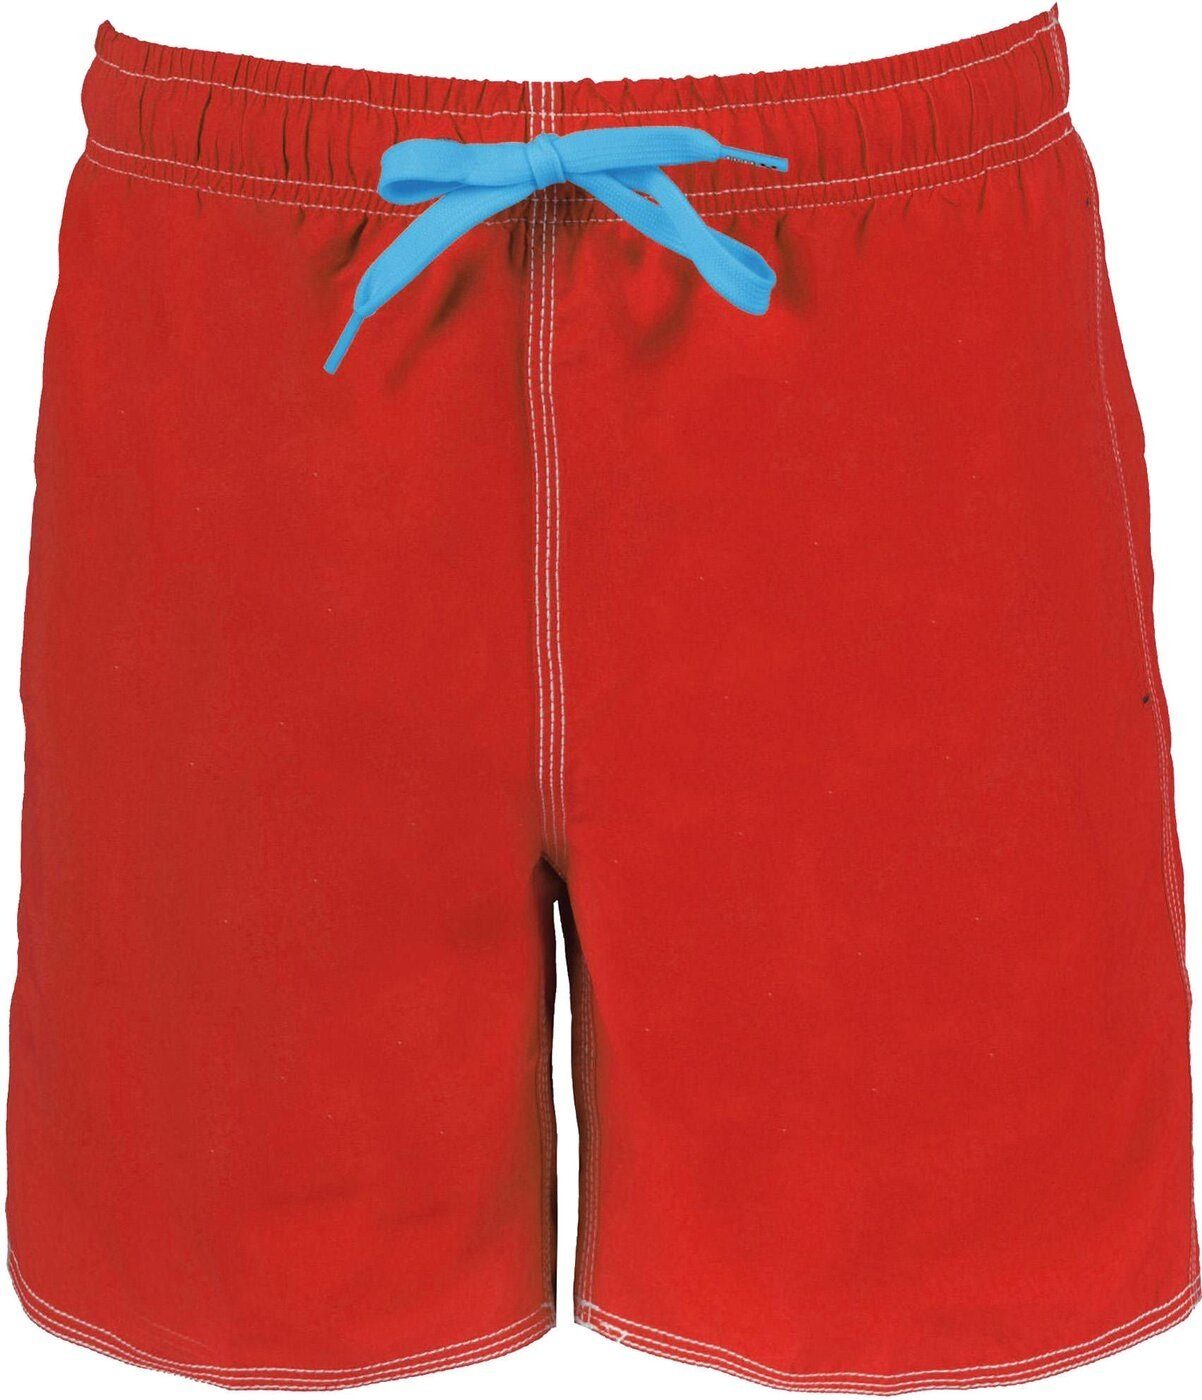 Arena Badeshorts SOLID RED-TURQUOISE BOXER FUNDAMENTALS 48